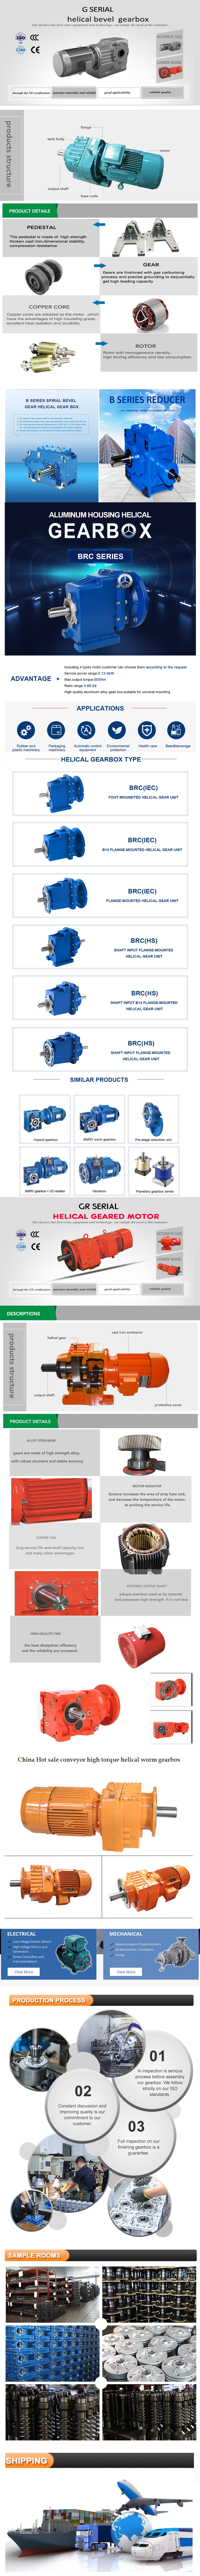   in Cordoba Argentina  sales   price   shop   near me   near me shop   factory   supplier Best Miniature Bevel Gear Box, Mini Mitre Gearbox 3 Way, Micro 90 Degree Gearbox Price manufacturer   best   Cost   Custom   Cheap   wholesaler 